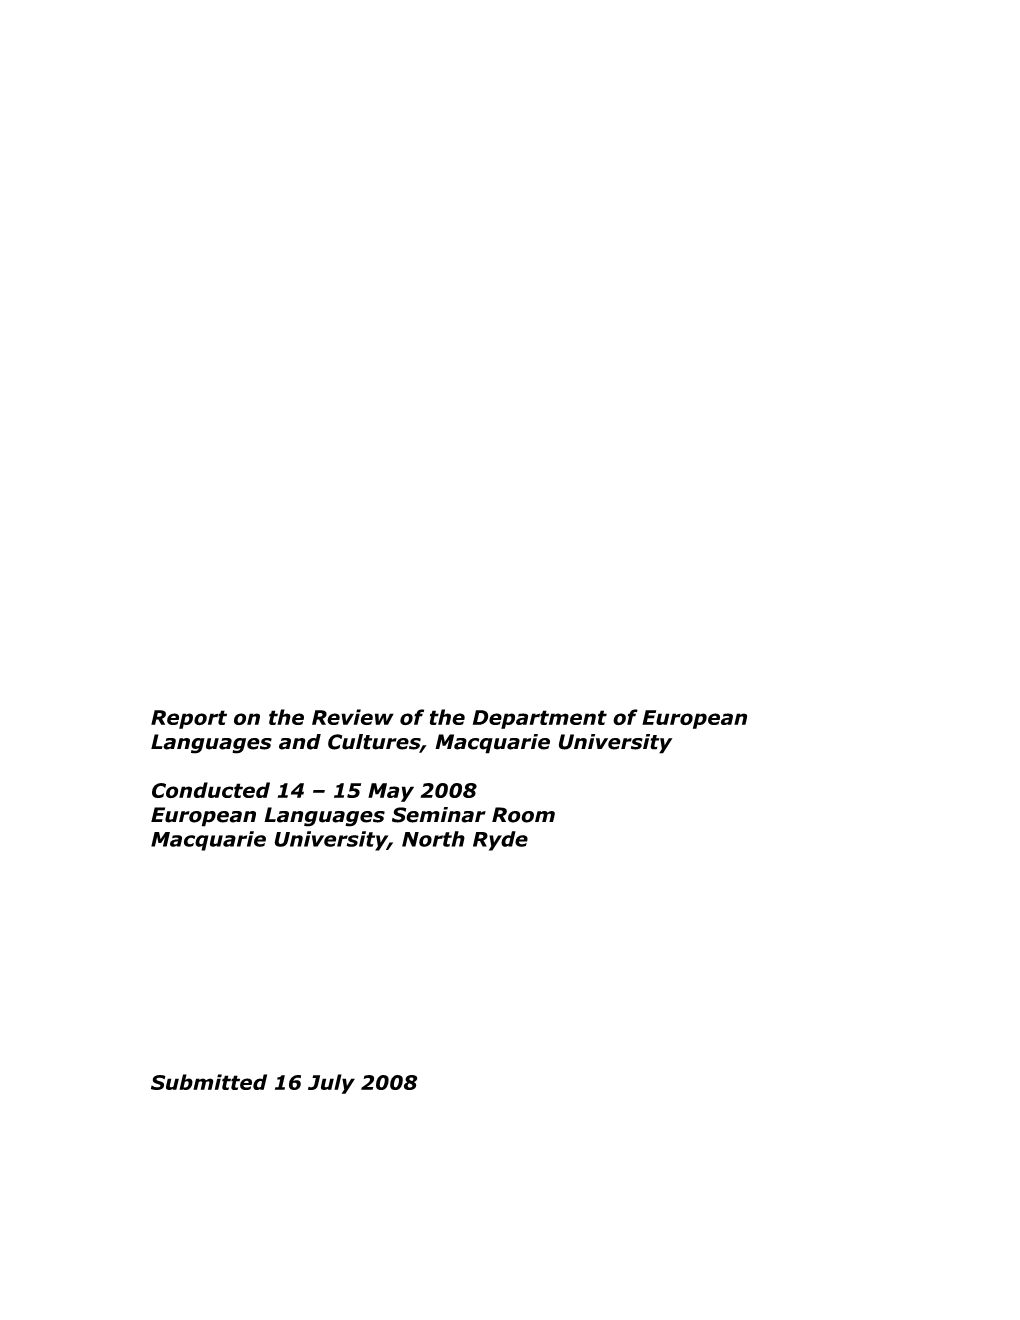 Report on the Review of the Department of European Languages and Cultures, Macquarieuniversity